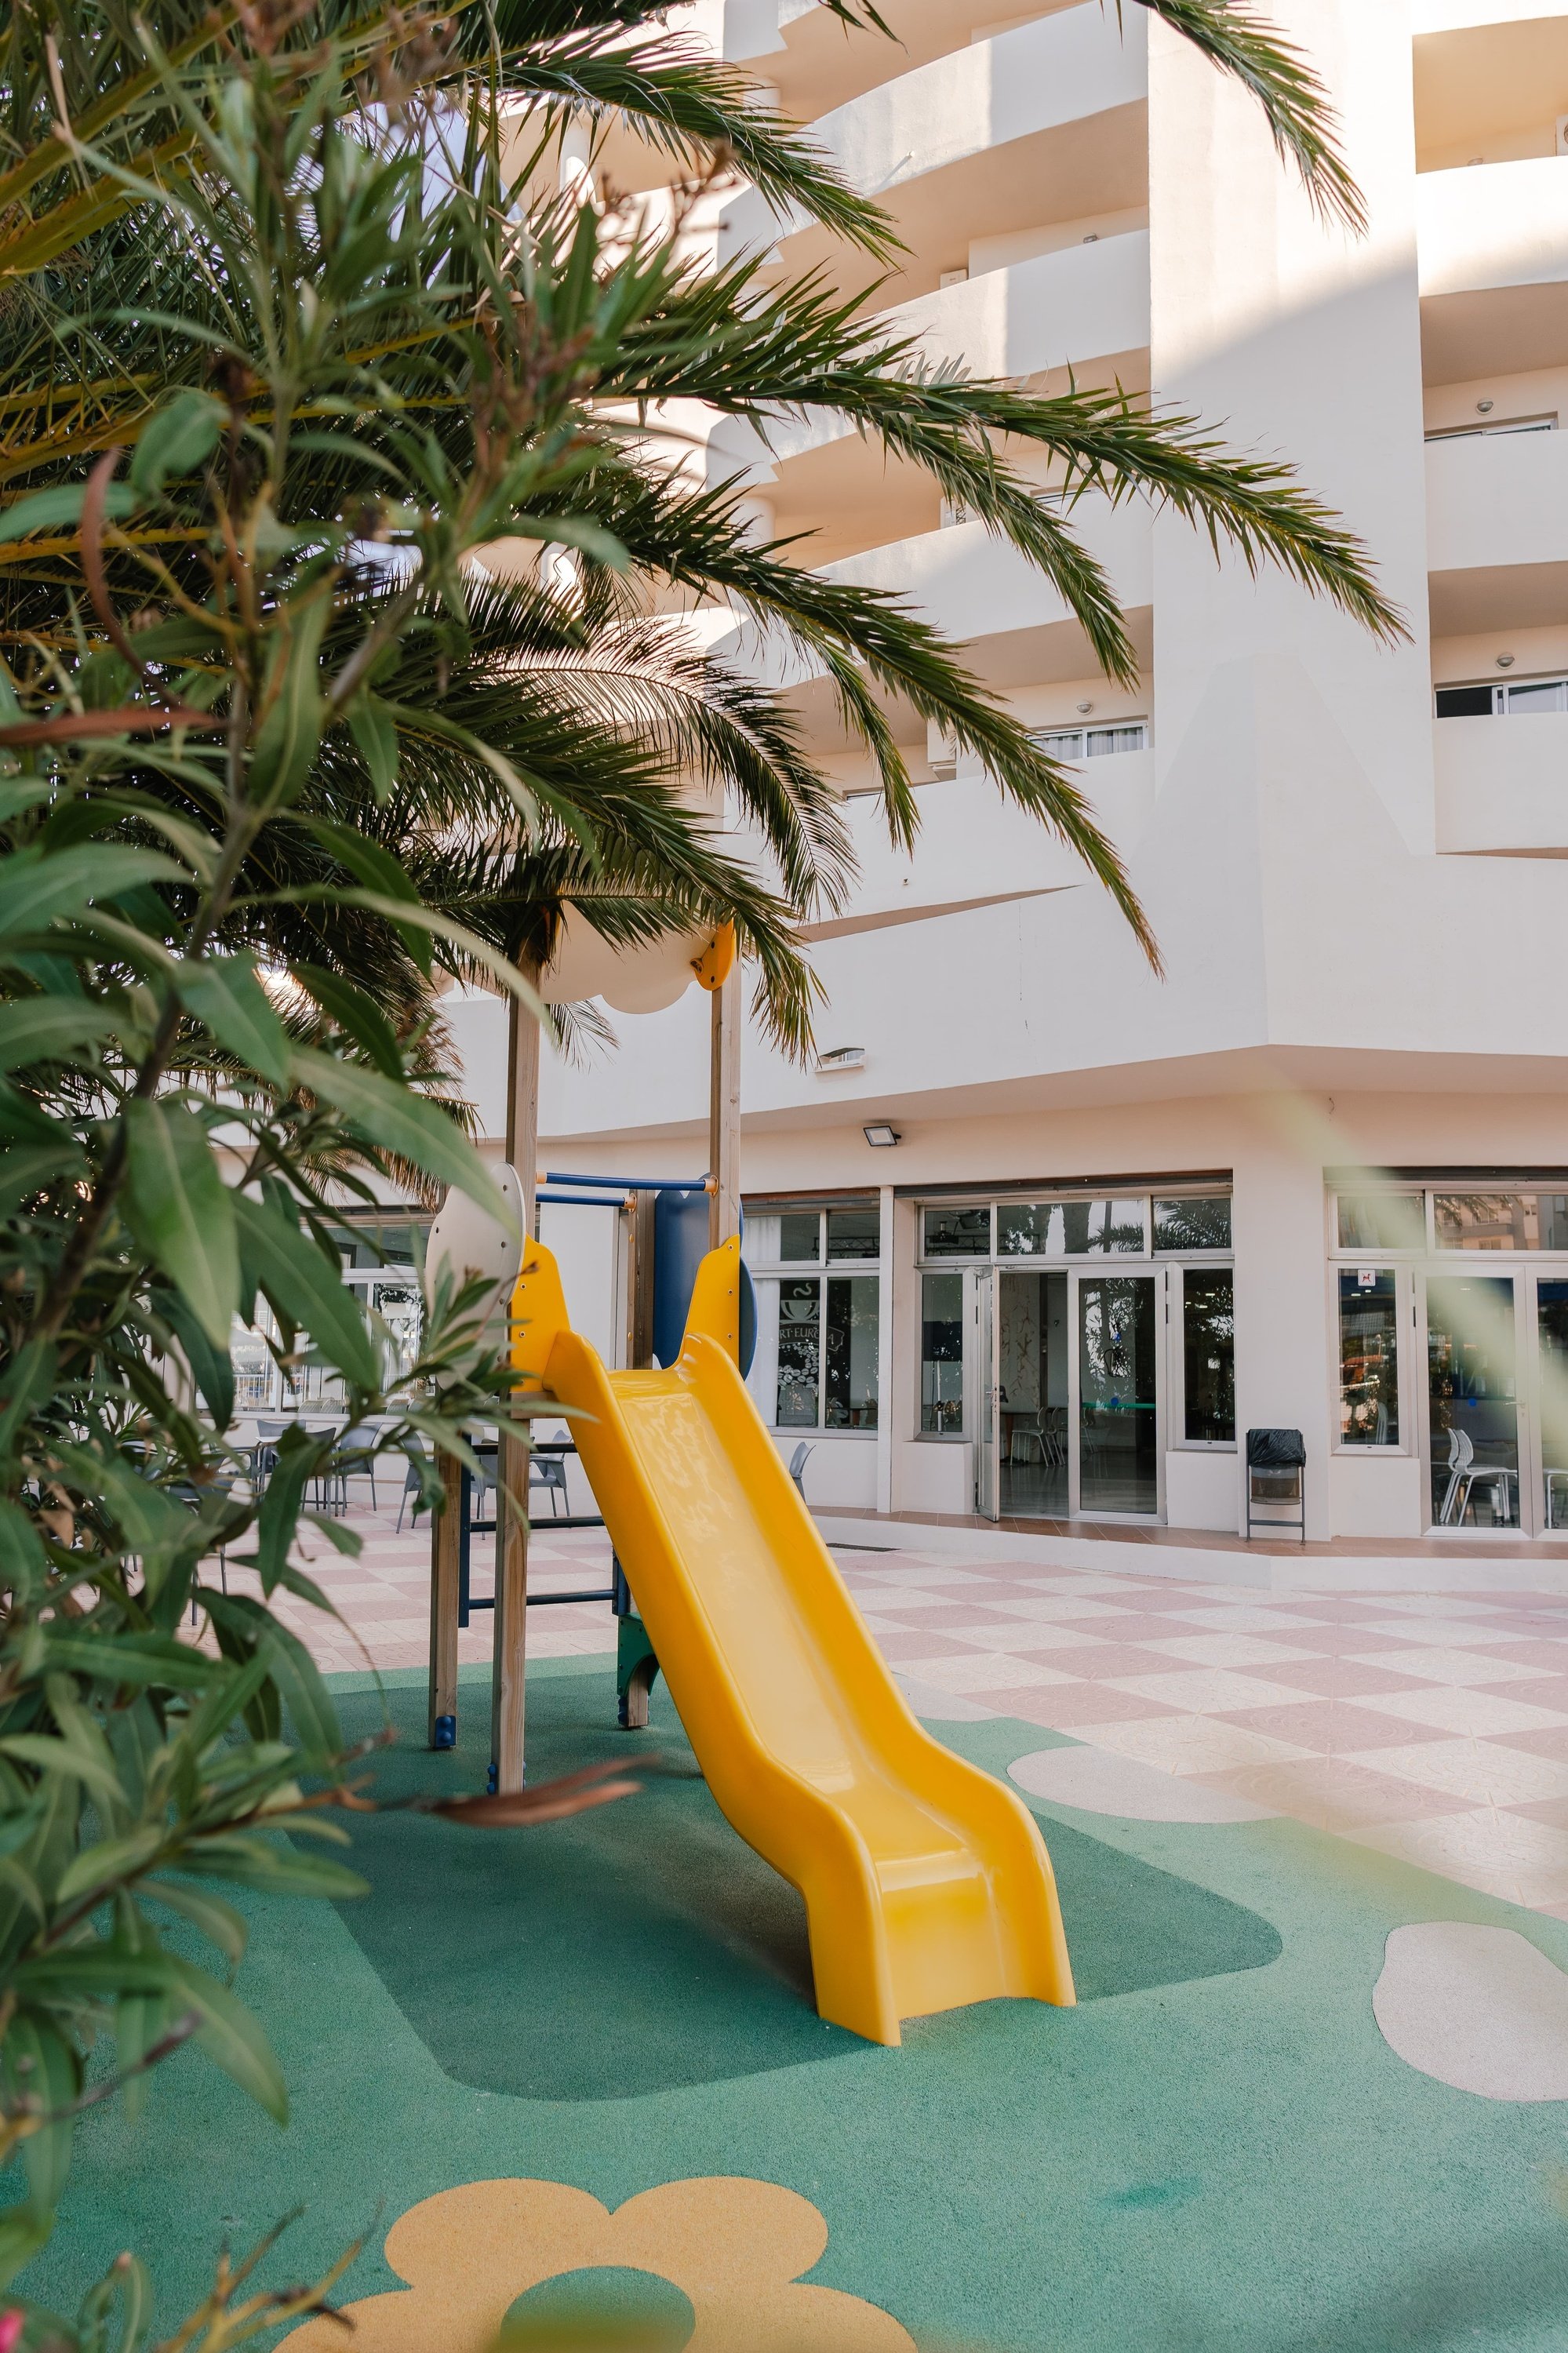 a yellow slide in a playground with a palm tree in the background